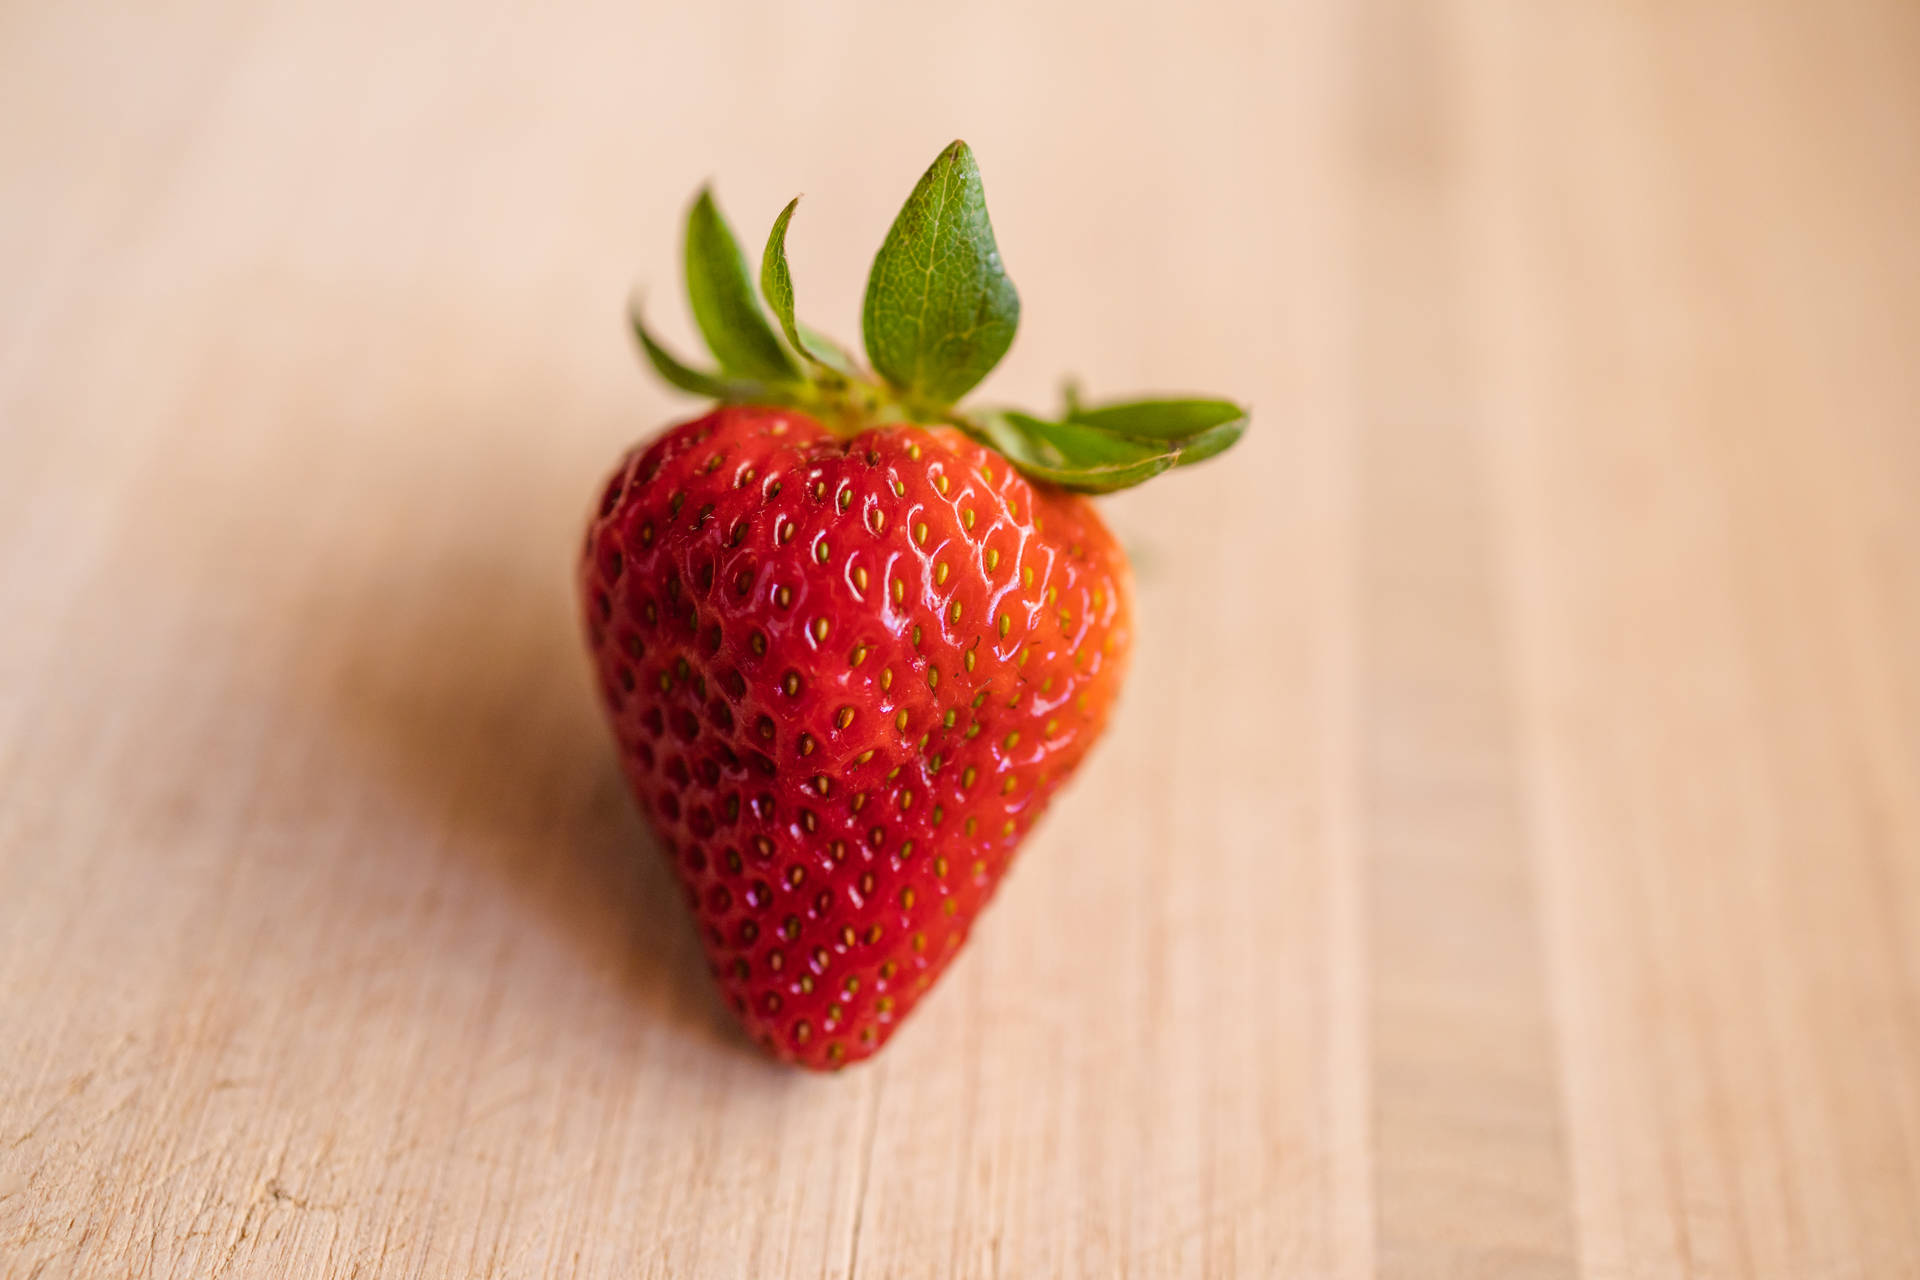 Strawberry 6240X4160 Wallpaper and Background Image